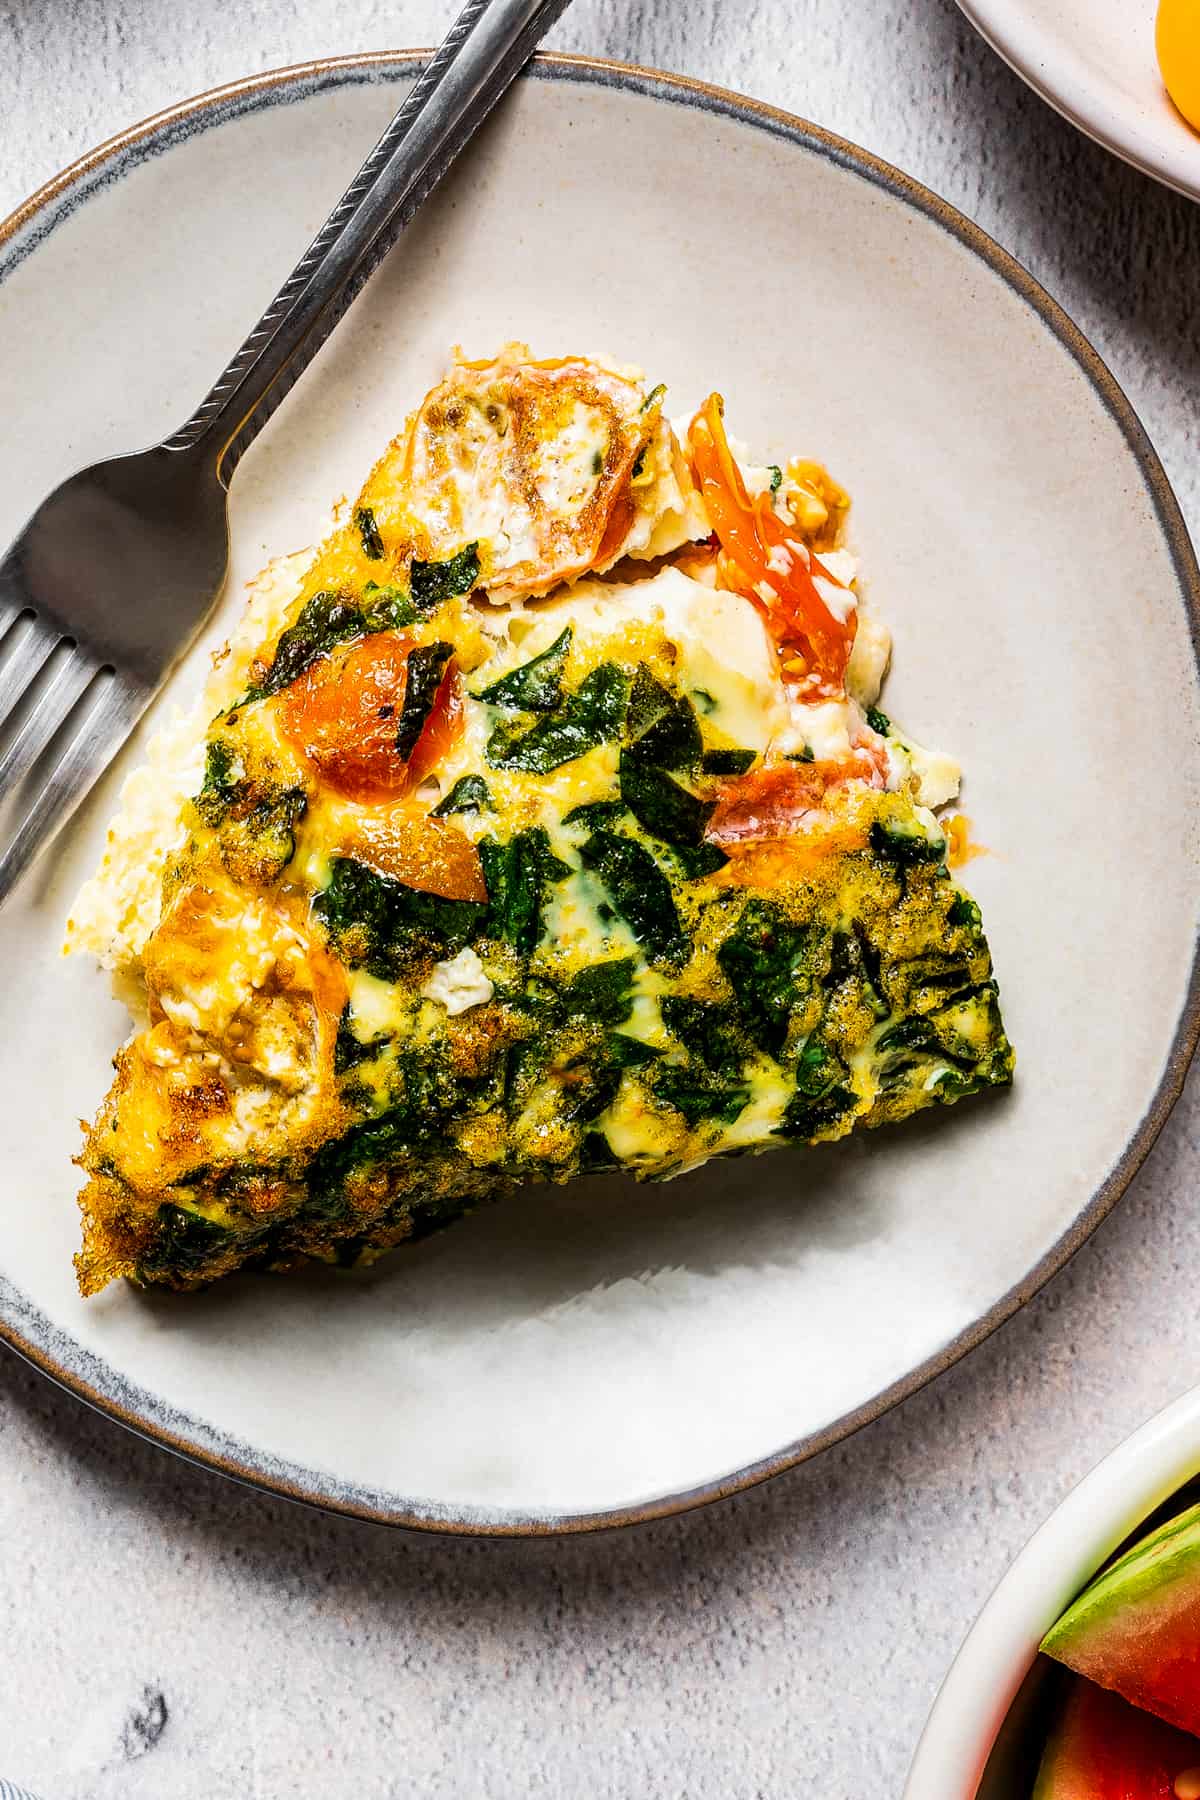 A slice of egg white frittata on a plate with a fork.